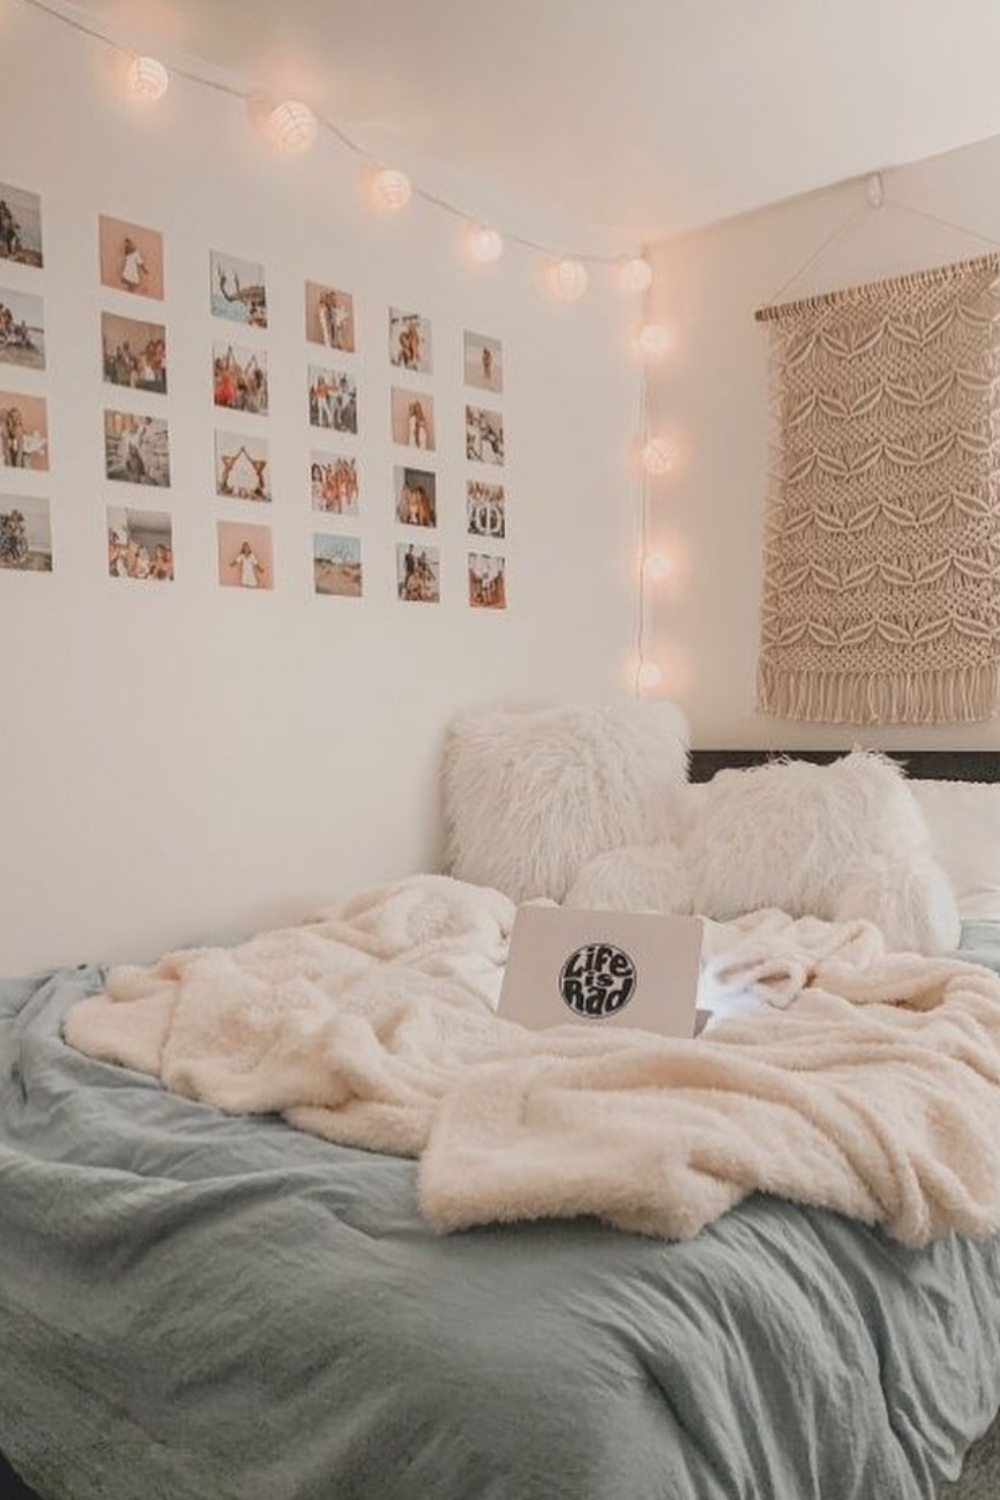 Things To Do In Your Room 40 Aesthetic Room Decors To Add To Your Room ...